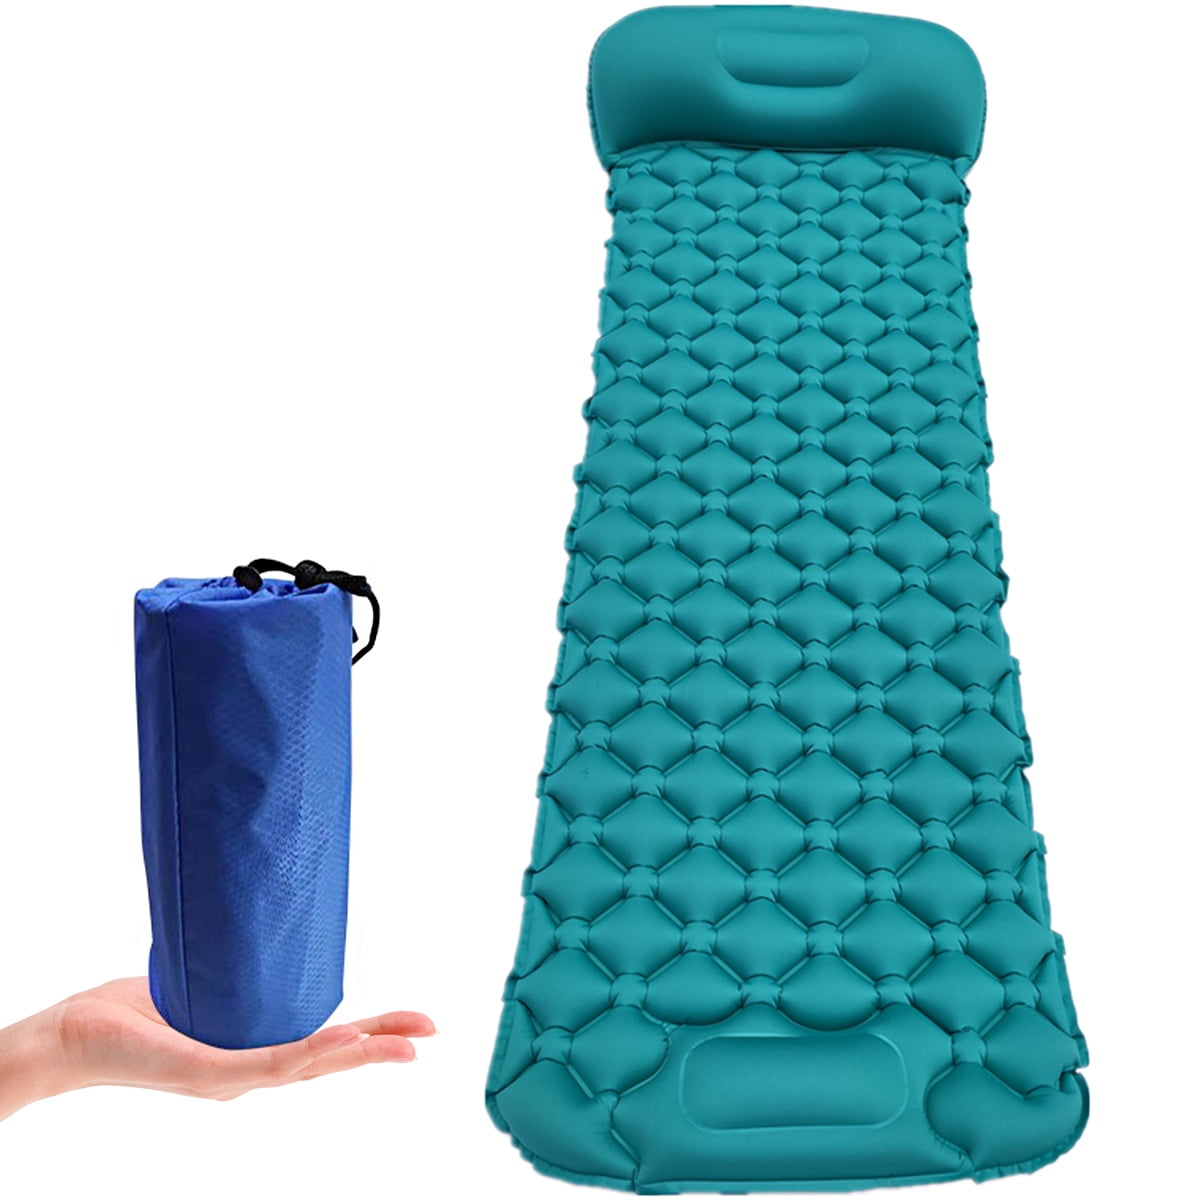 Foam Sleep Pad- 0.50” Thick Camping Mat for Cots, Tents, Hiking &  Sleepovers- Non-Slip, Lightweight, Waterproof & Carry Handle by Wakeman  Outdoors 